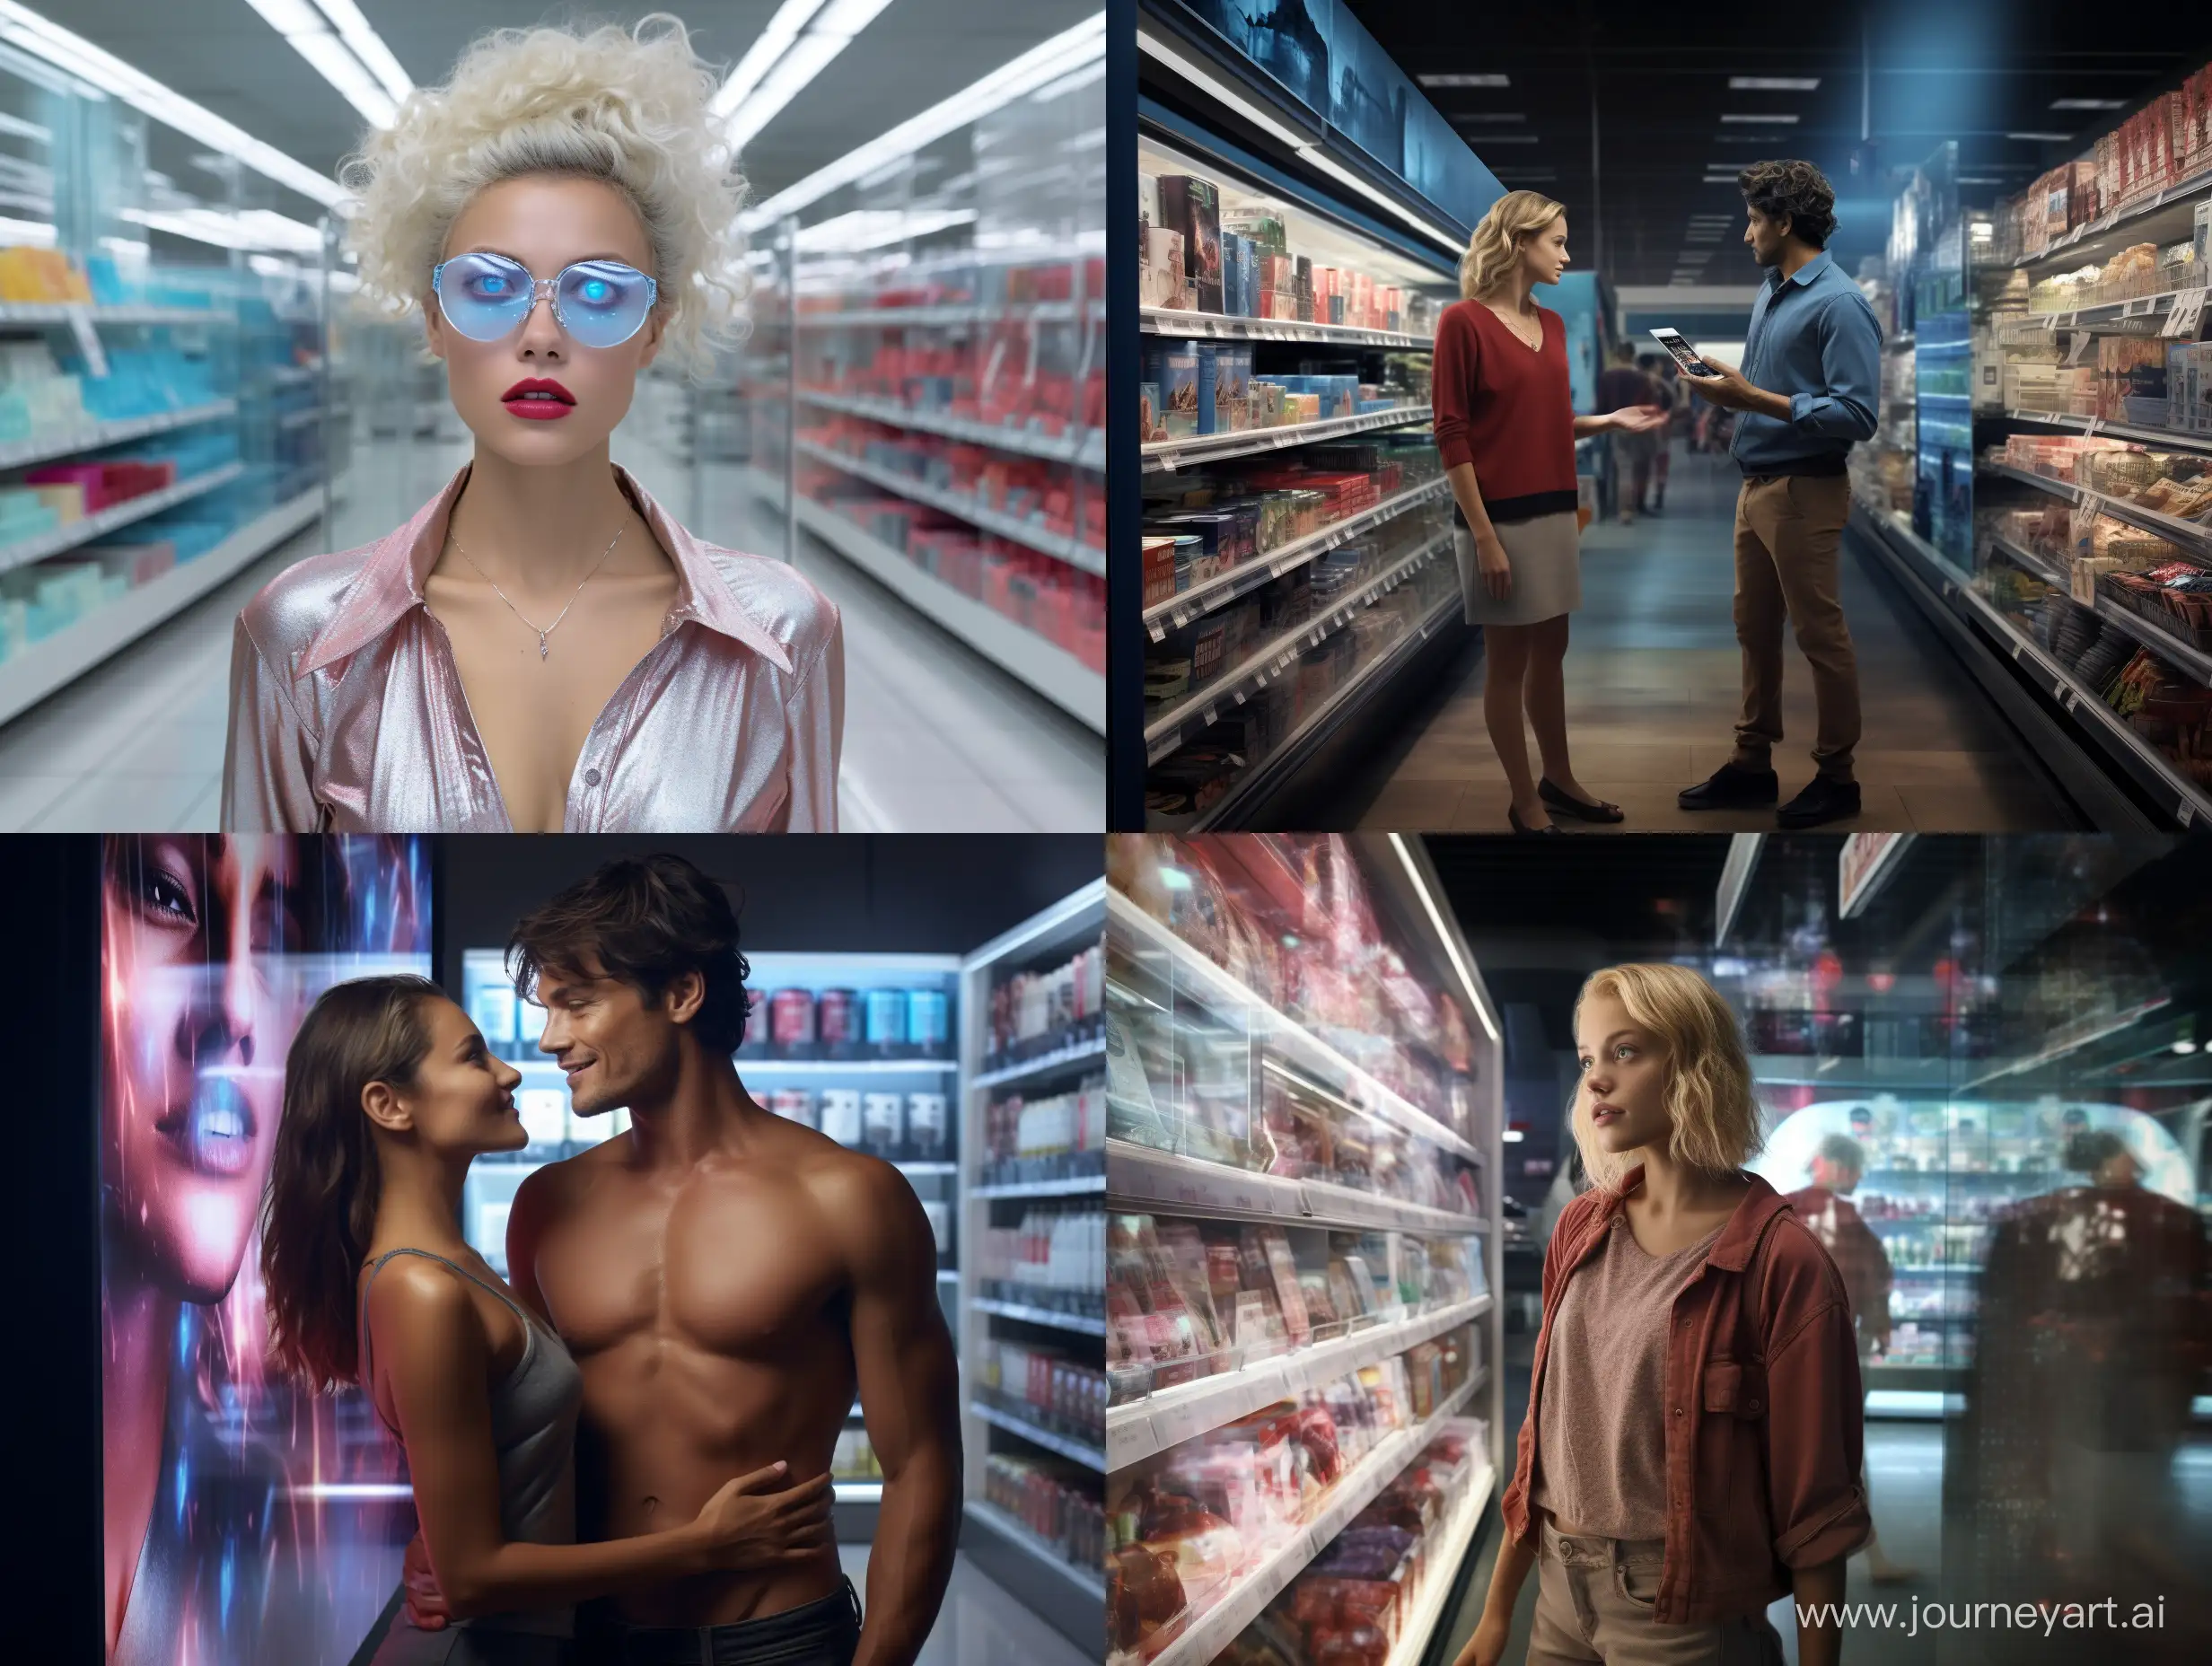 in the near future marketing collaboration in retail like in the “Black mirror” series hyper realistic photo